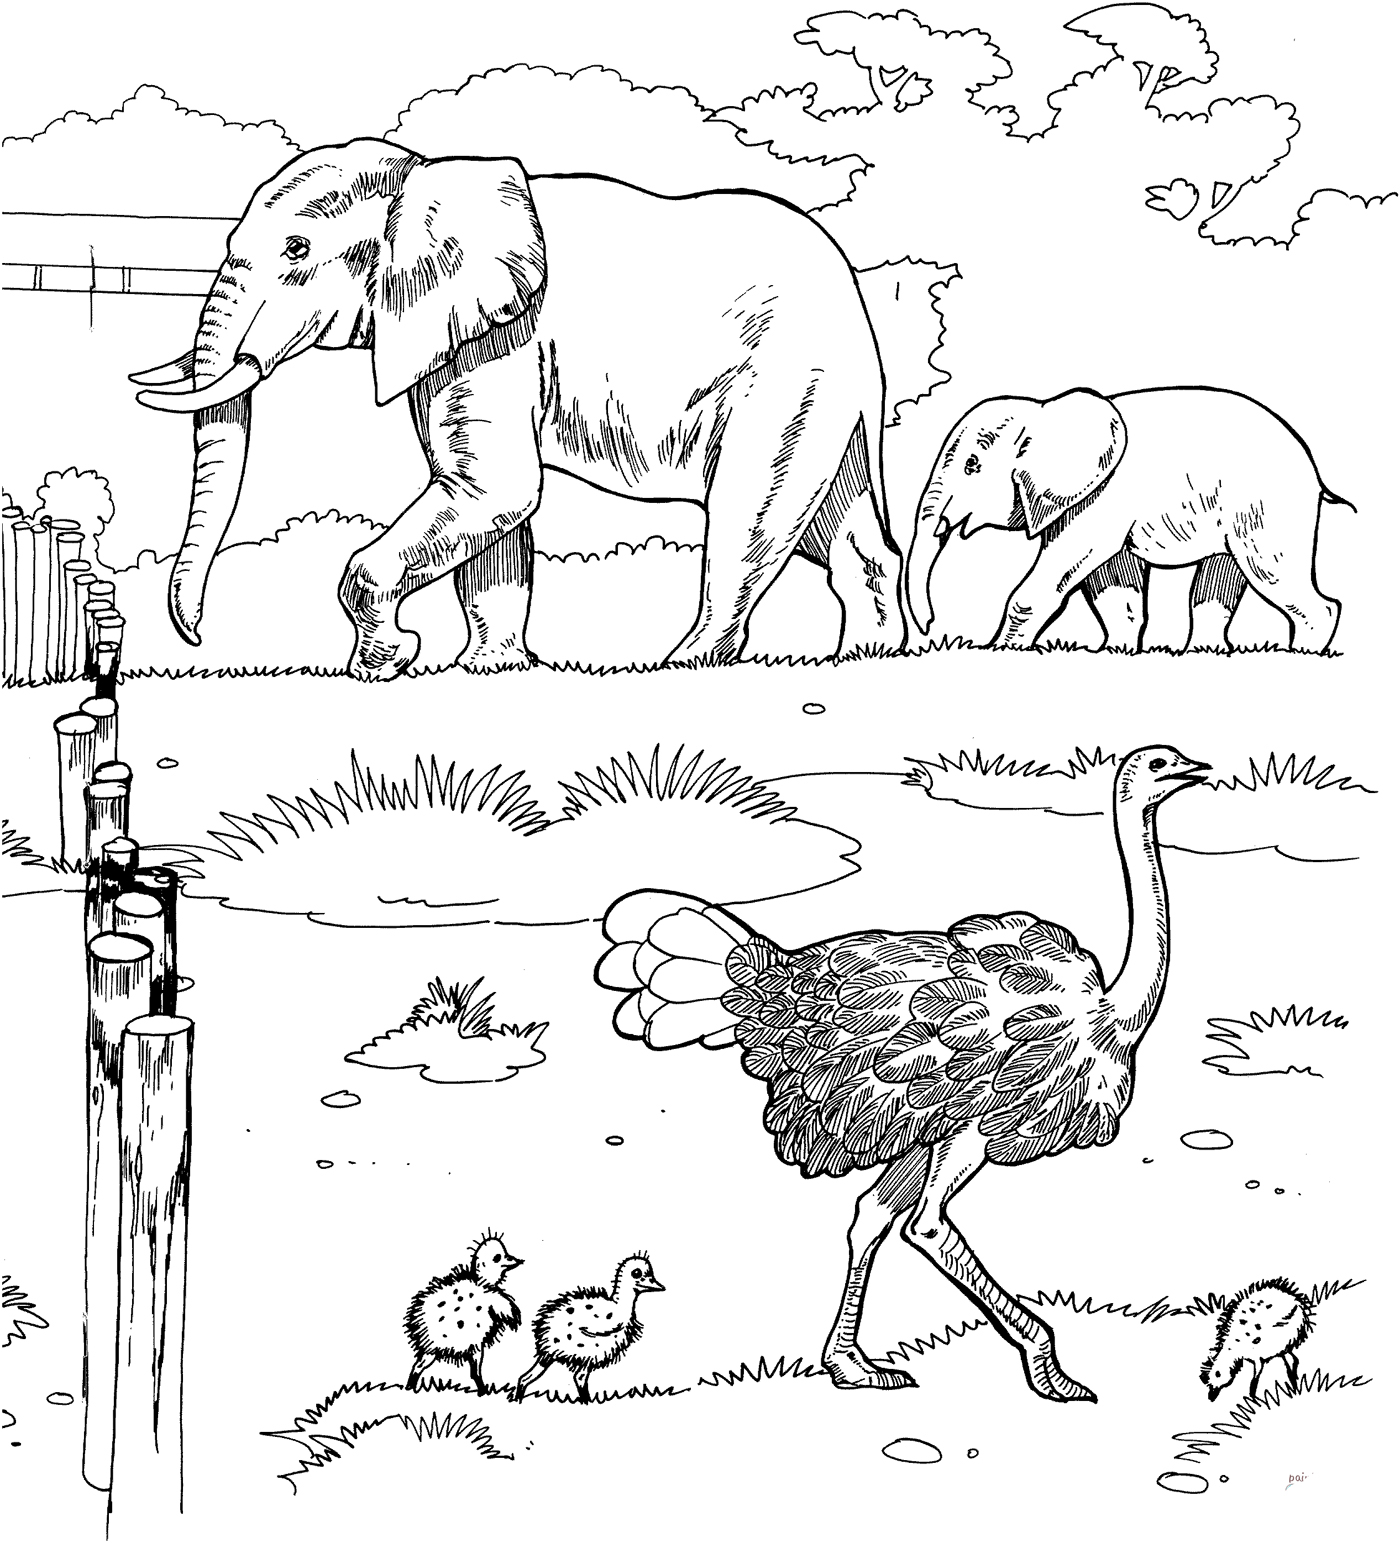 Ostrich and elephants